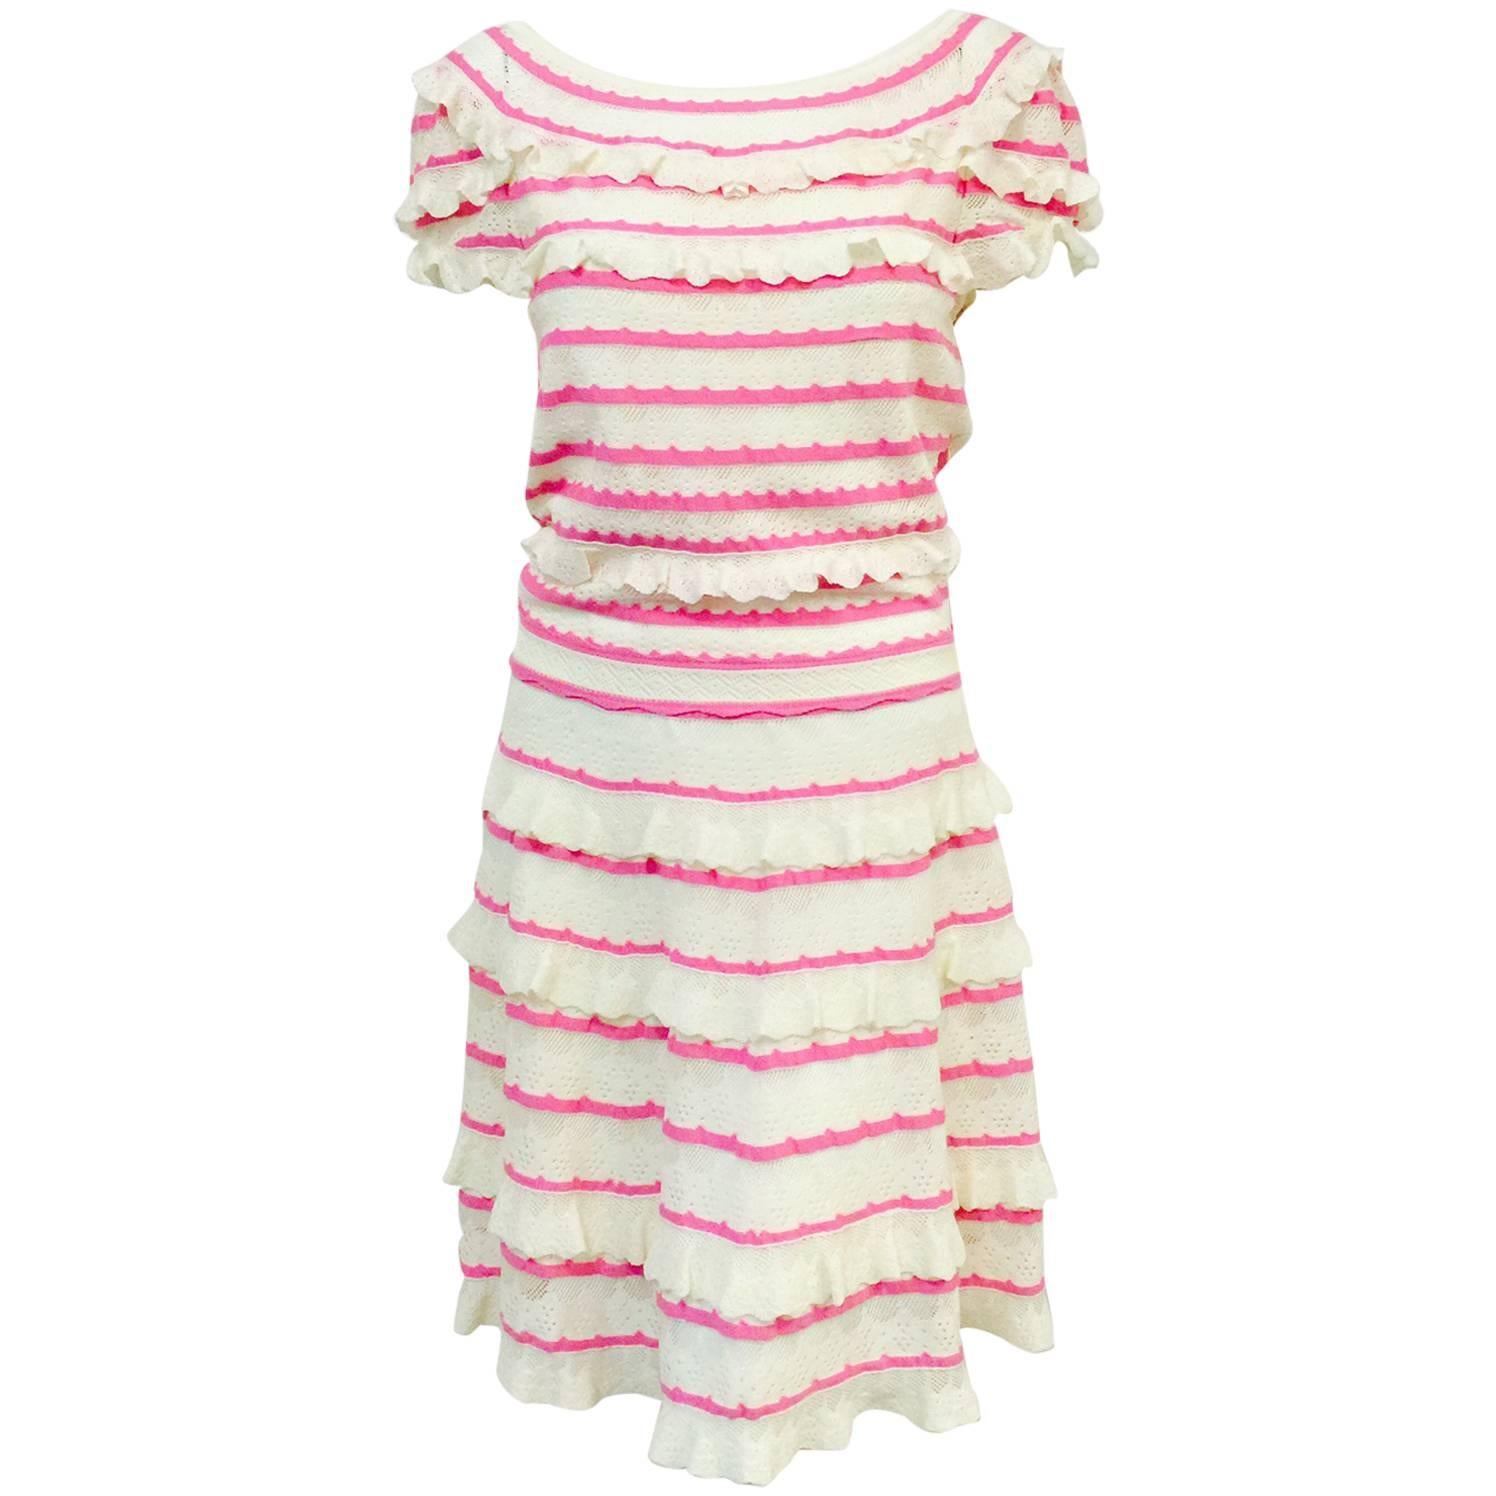 Christian Dior Ivory and Pink Lace Knit Short Sleeve Dress W Bateau Neckline